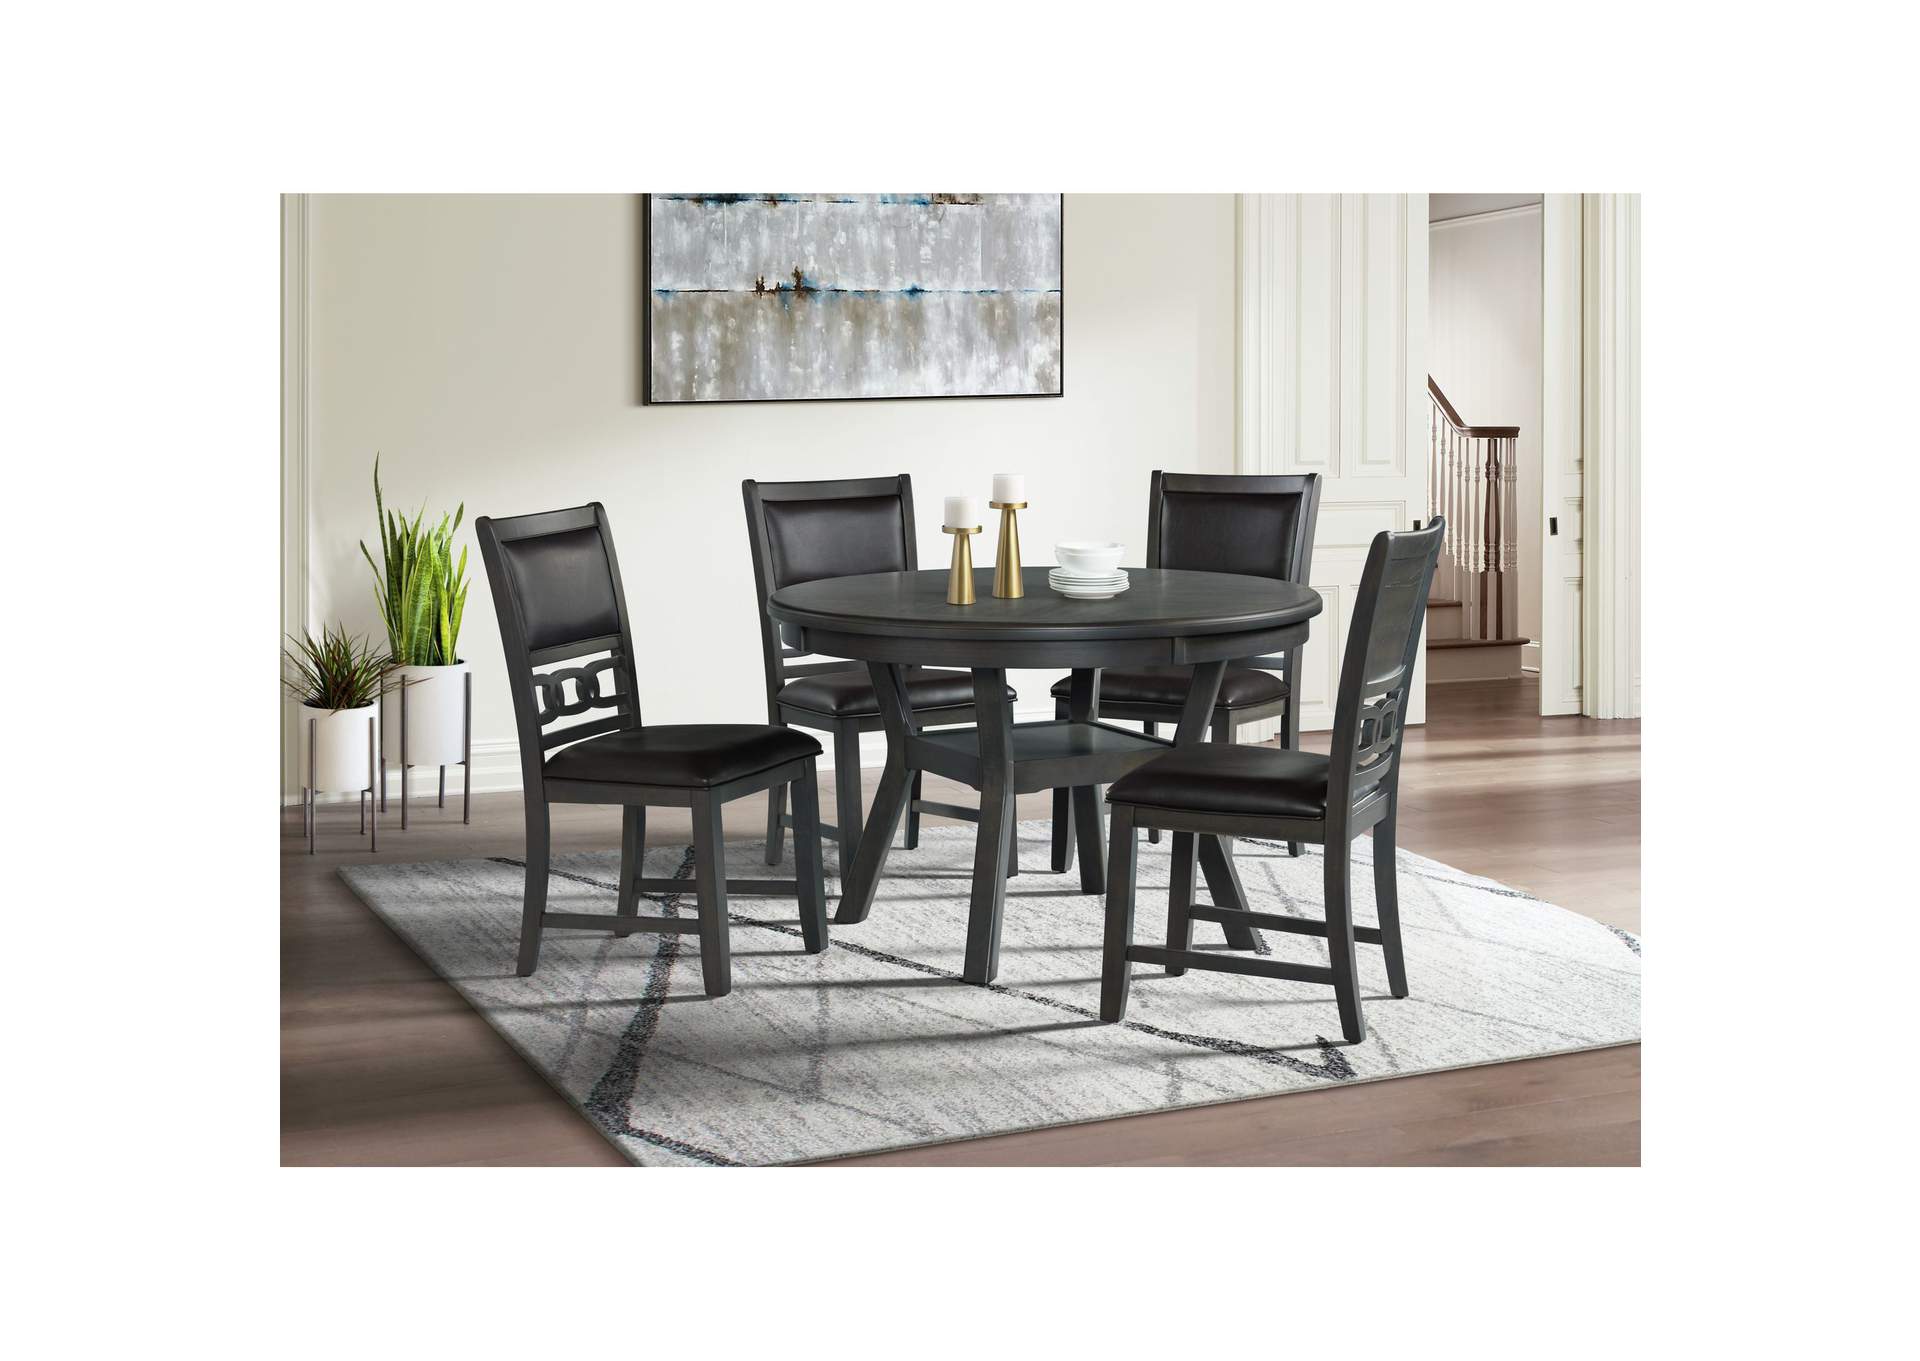 Amherst Dining Side Chair With Pu Cushion Side Stretcher Grey Finish 2 Per Pack,Elements